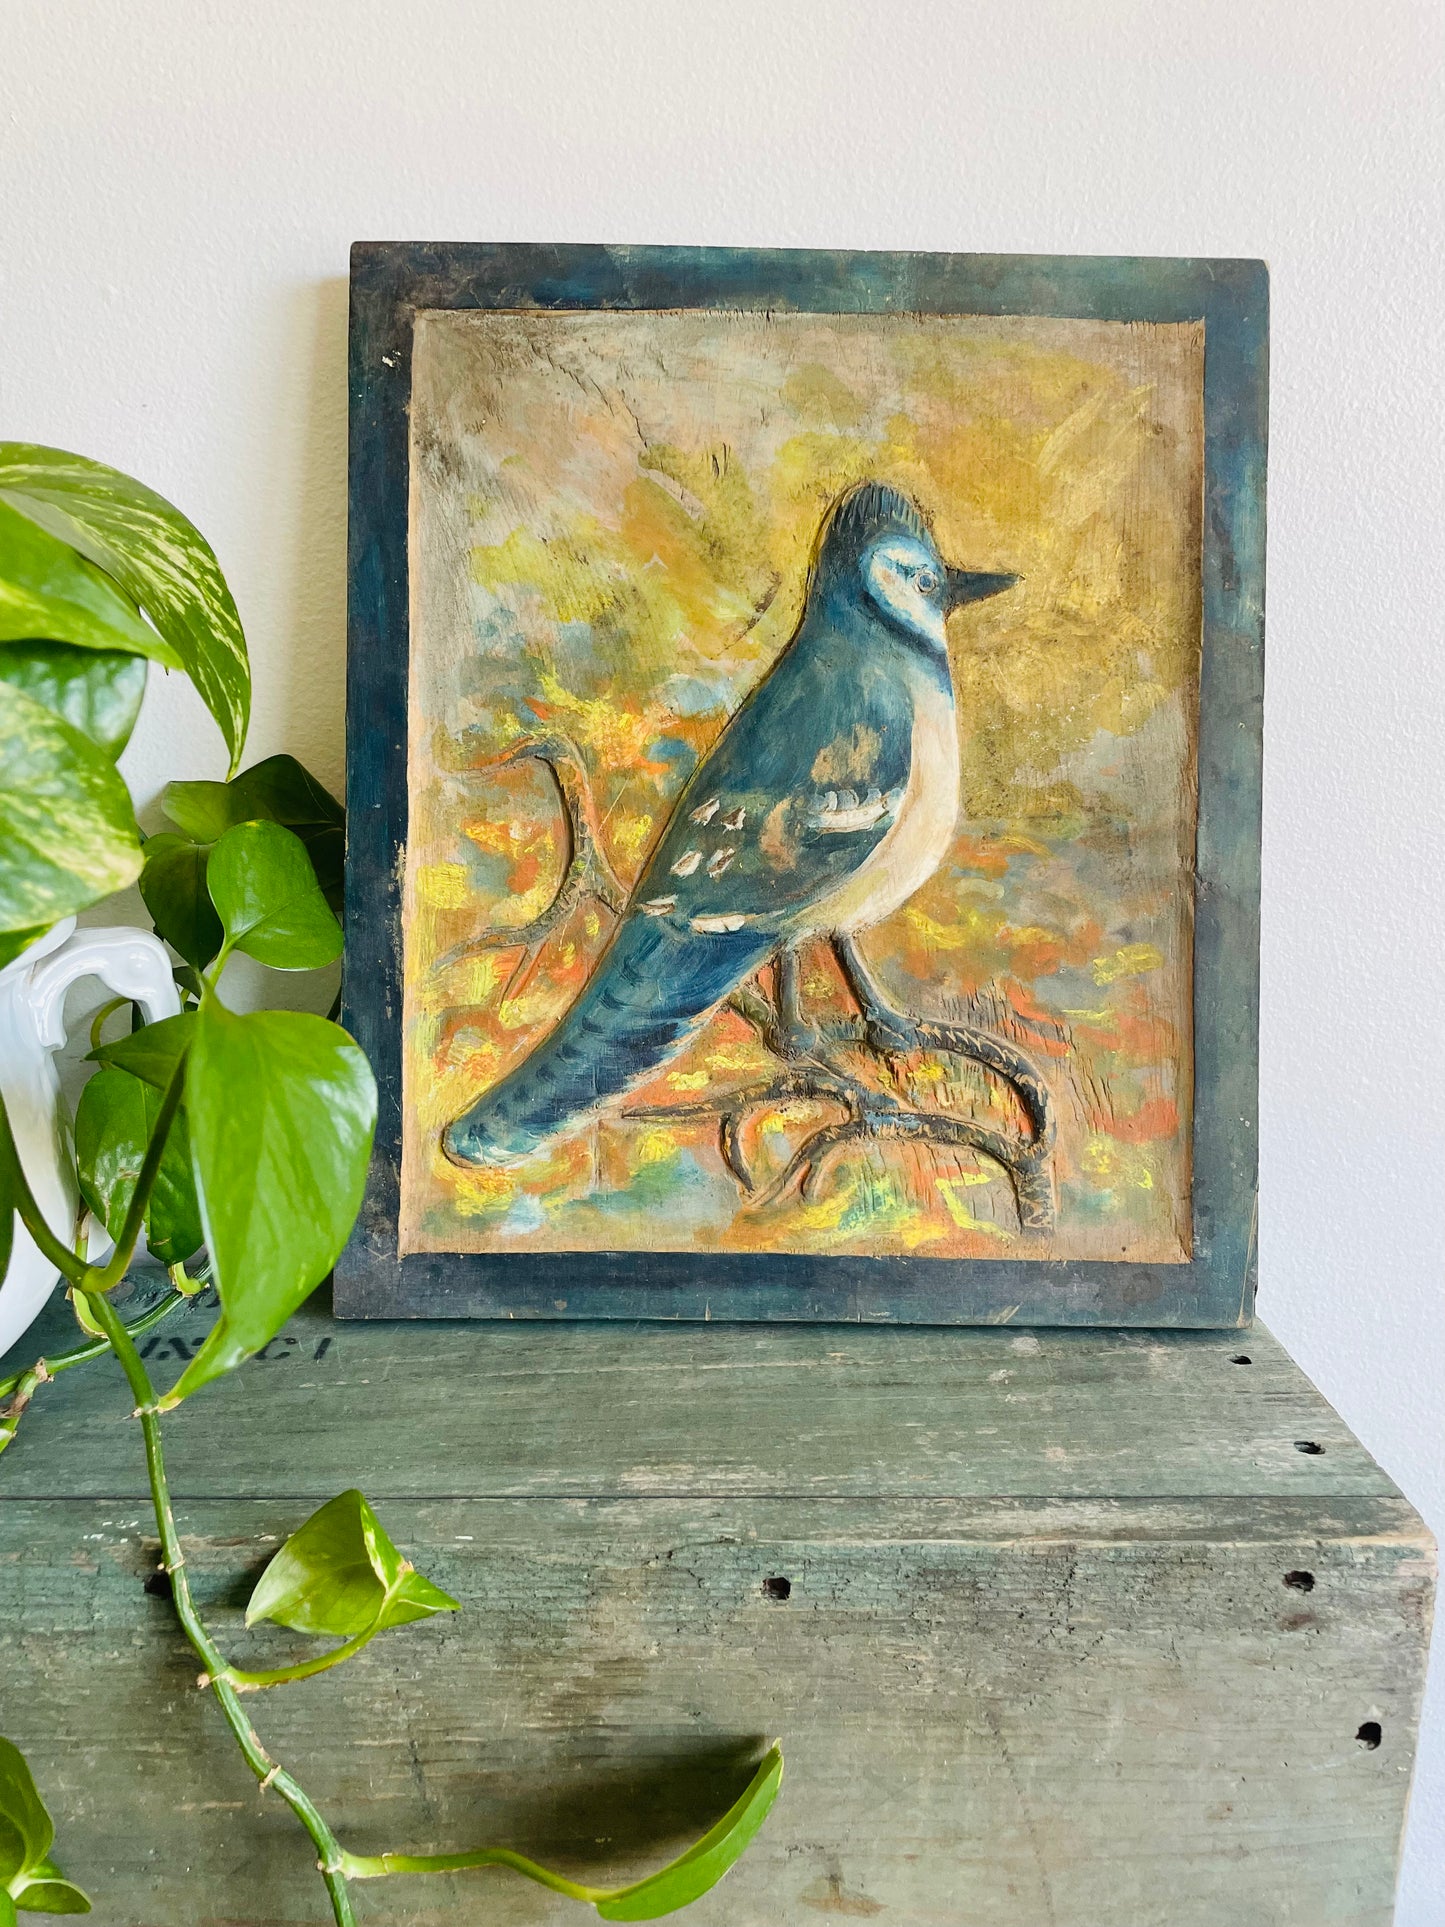 Handmade One of a Kind Recessed Wood Picture Plaque Sign with Blue Jay Bird